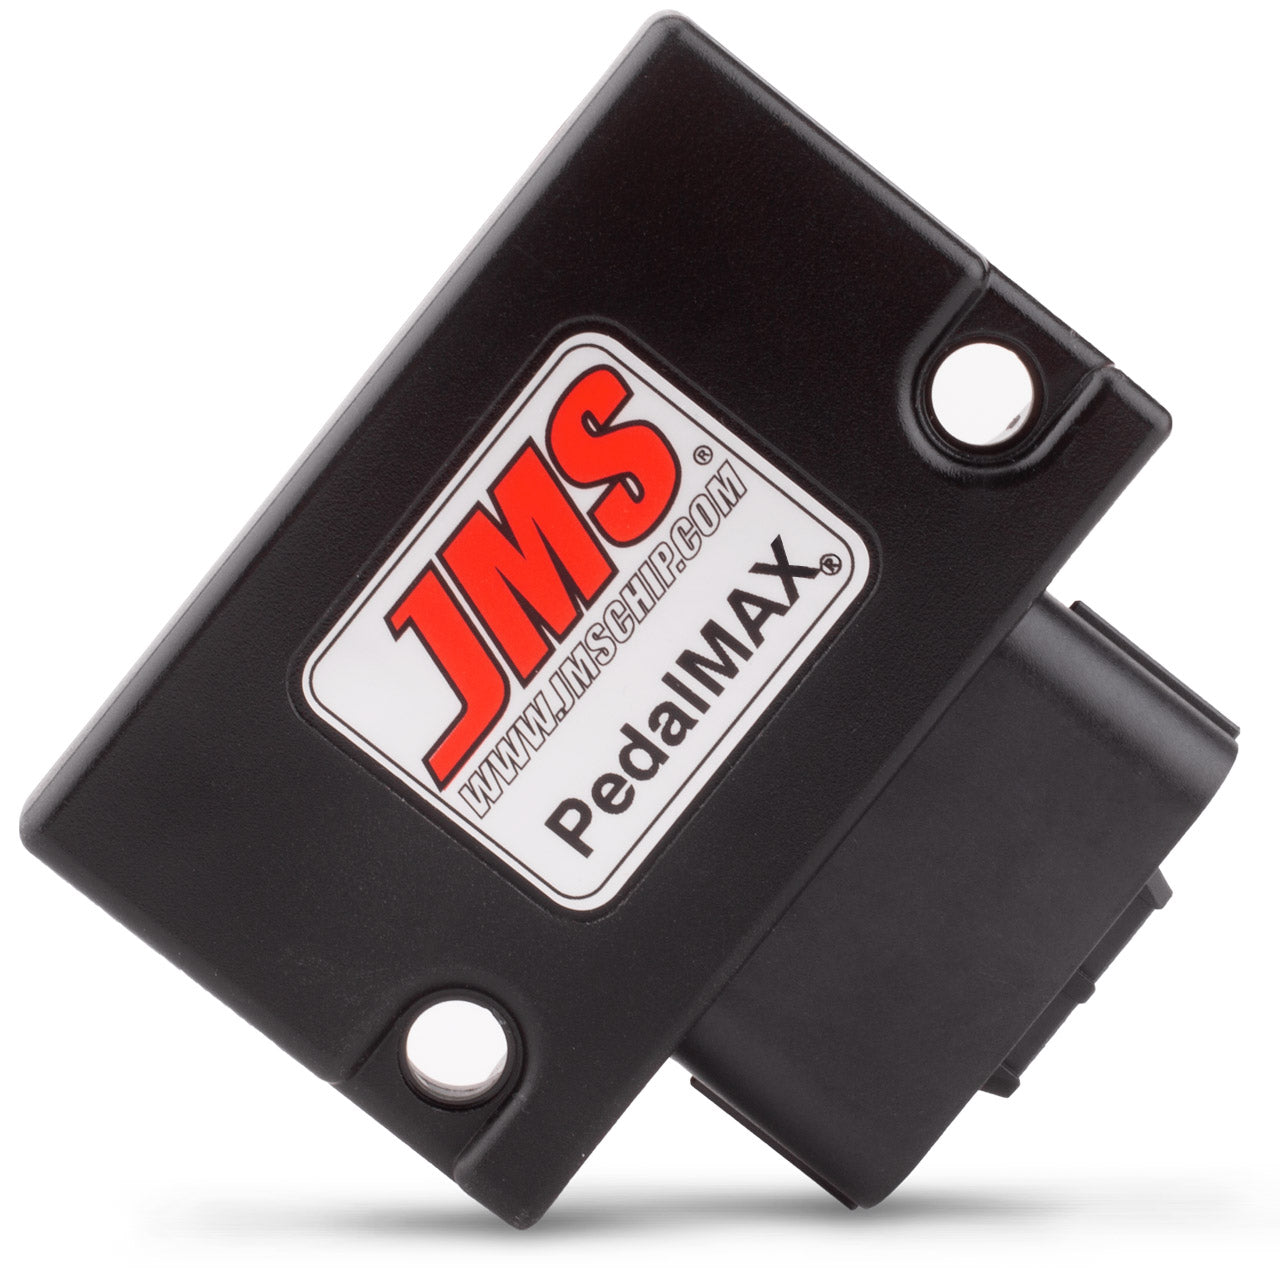 JMS PedalMAX Extreme Drive By Wire Throttle Enhancement Device - Plug and Play w/ Chevrolet Corvette C7 and C8 -- Includes Control Knob PX1415GME